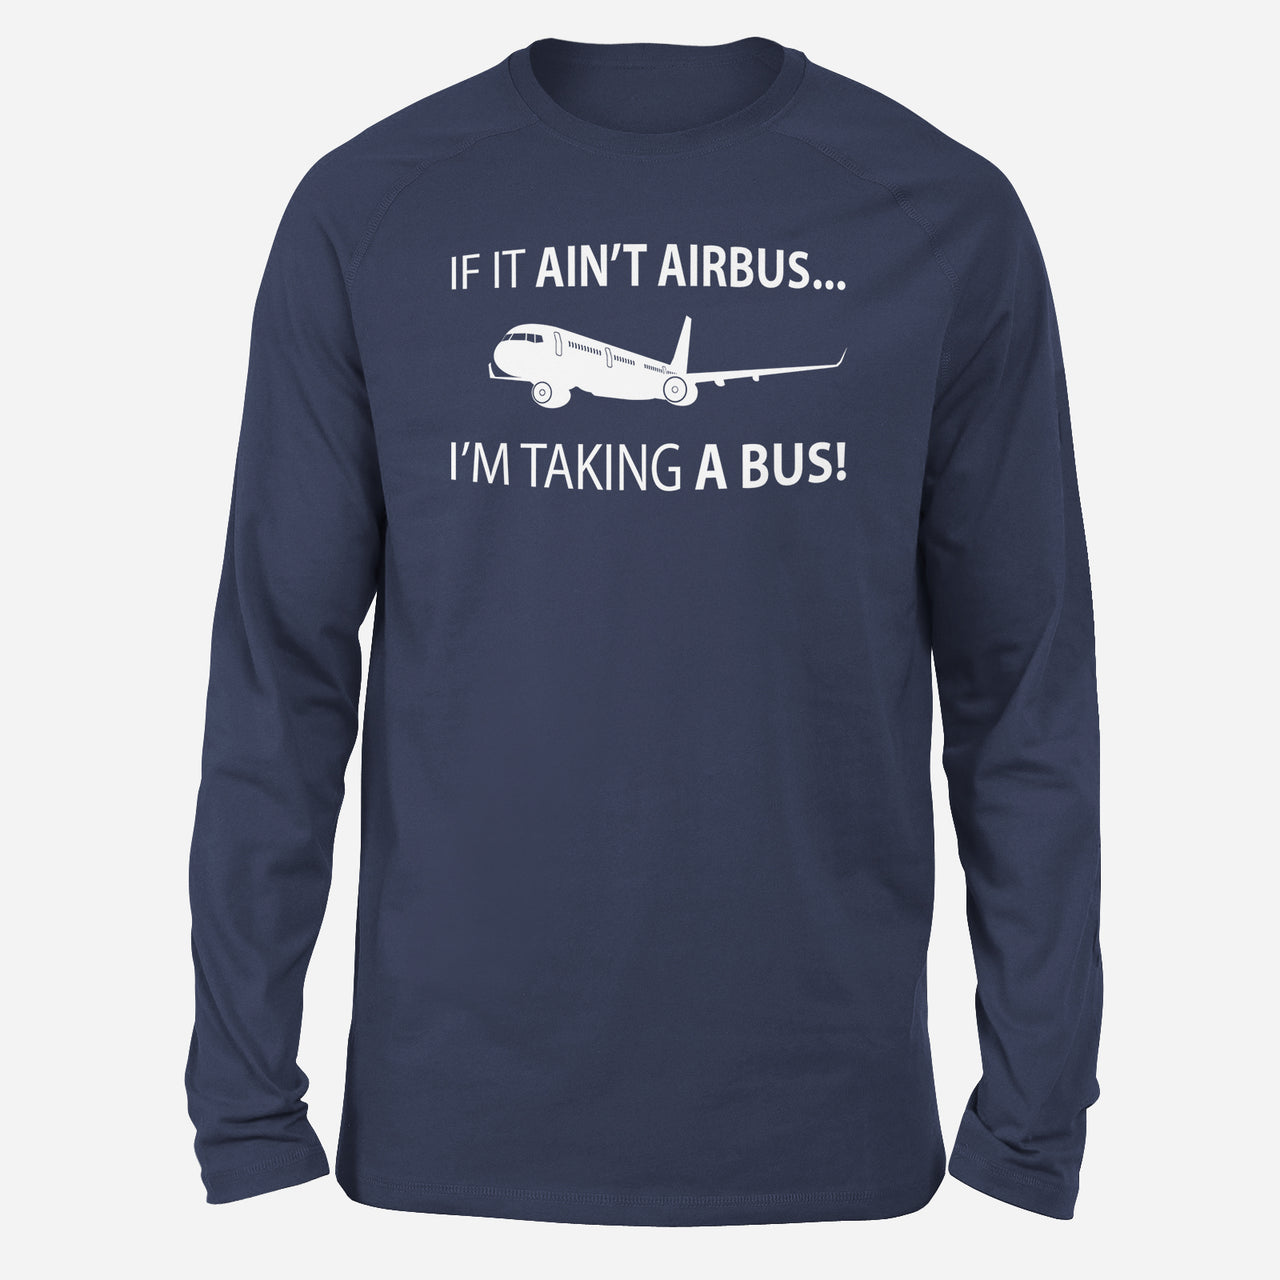 If It Ain't Airbus I'm Taking A Bus Designed Long-Sleeve T-Shirts